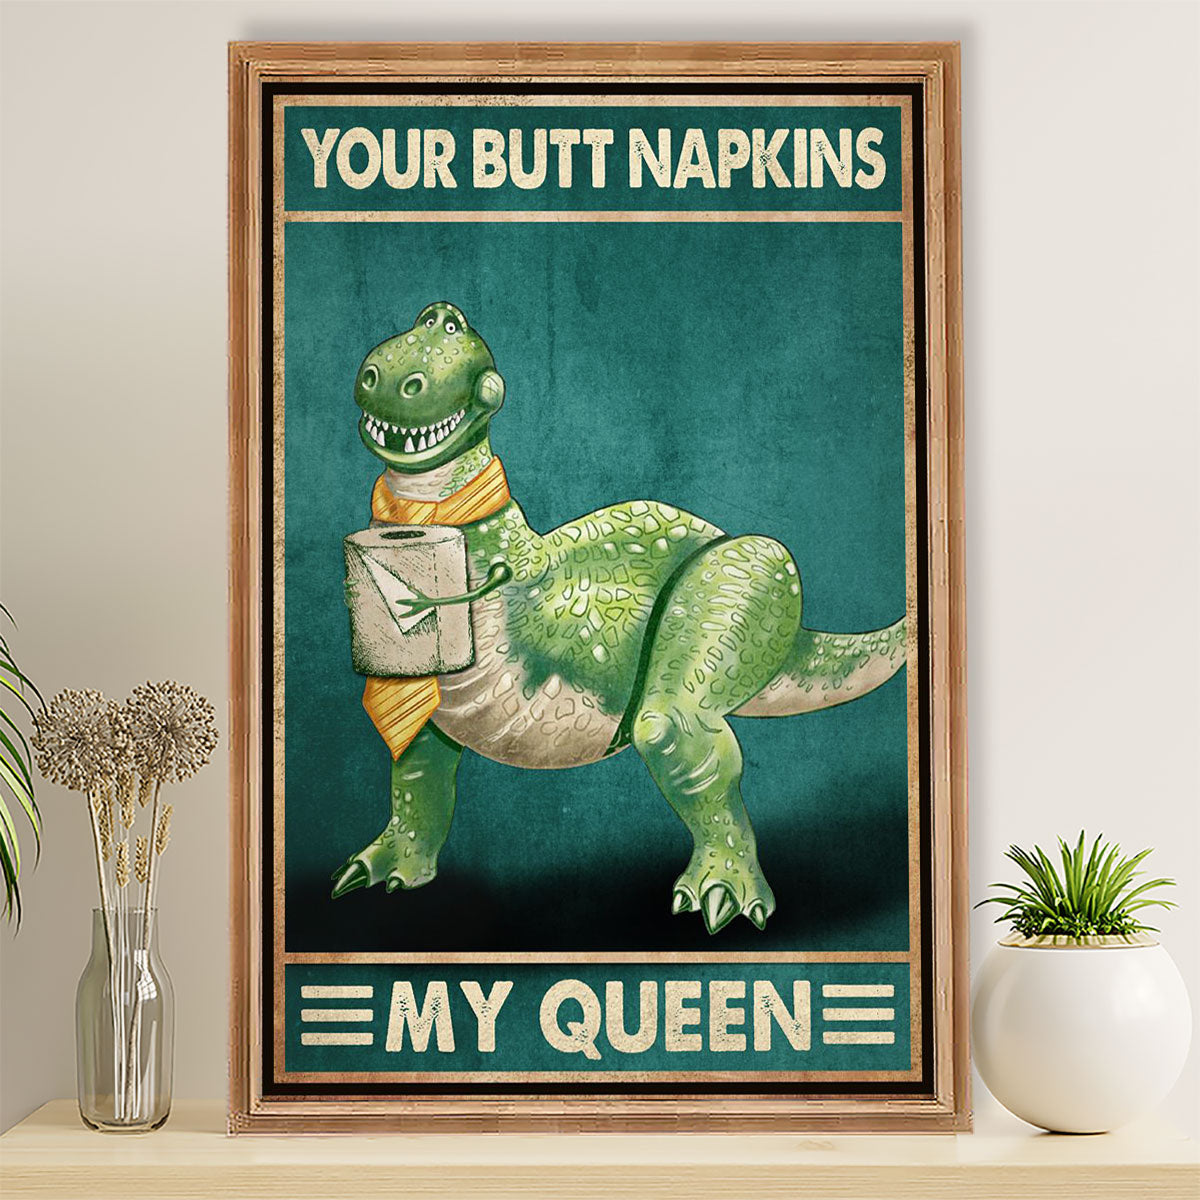 Bathroom Poster TM Your Butt | Funny Wall Art Gift for Friends, Room Décor for Restroom